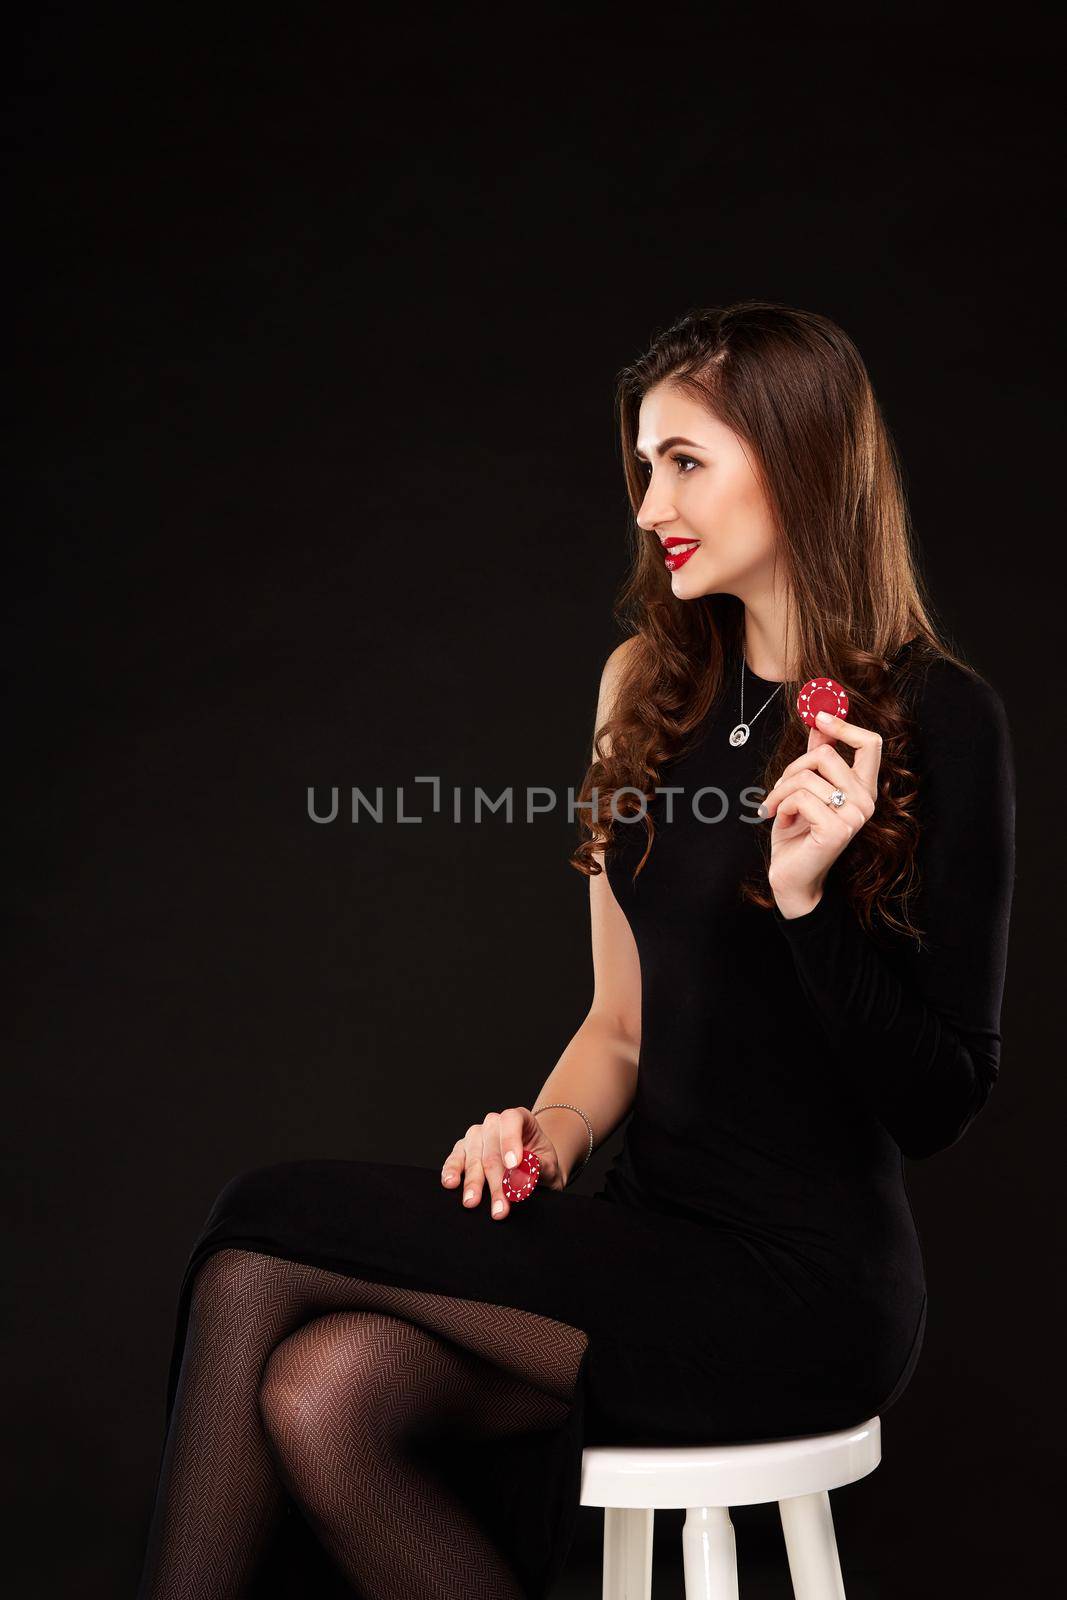 Sexy curly hair brunette in black dress posing with chips in her hands, poker concept black background. sits on a chair